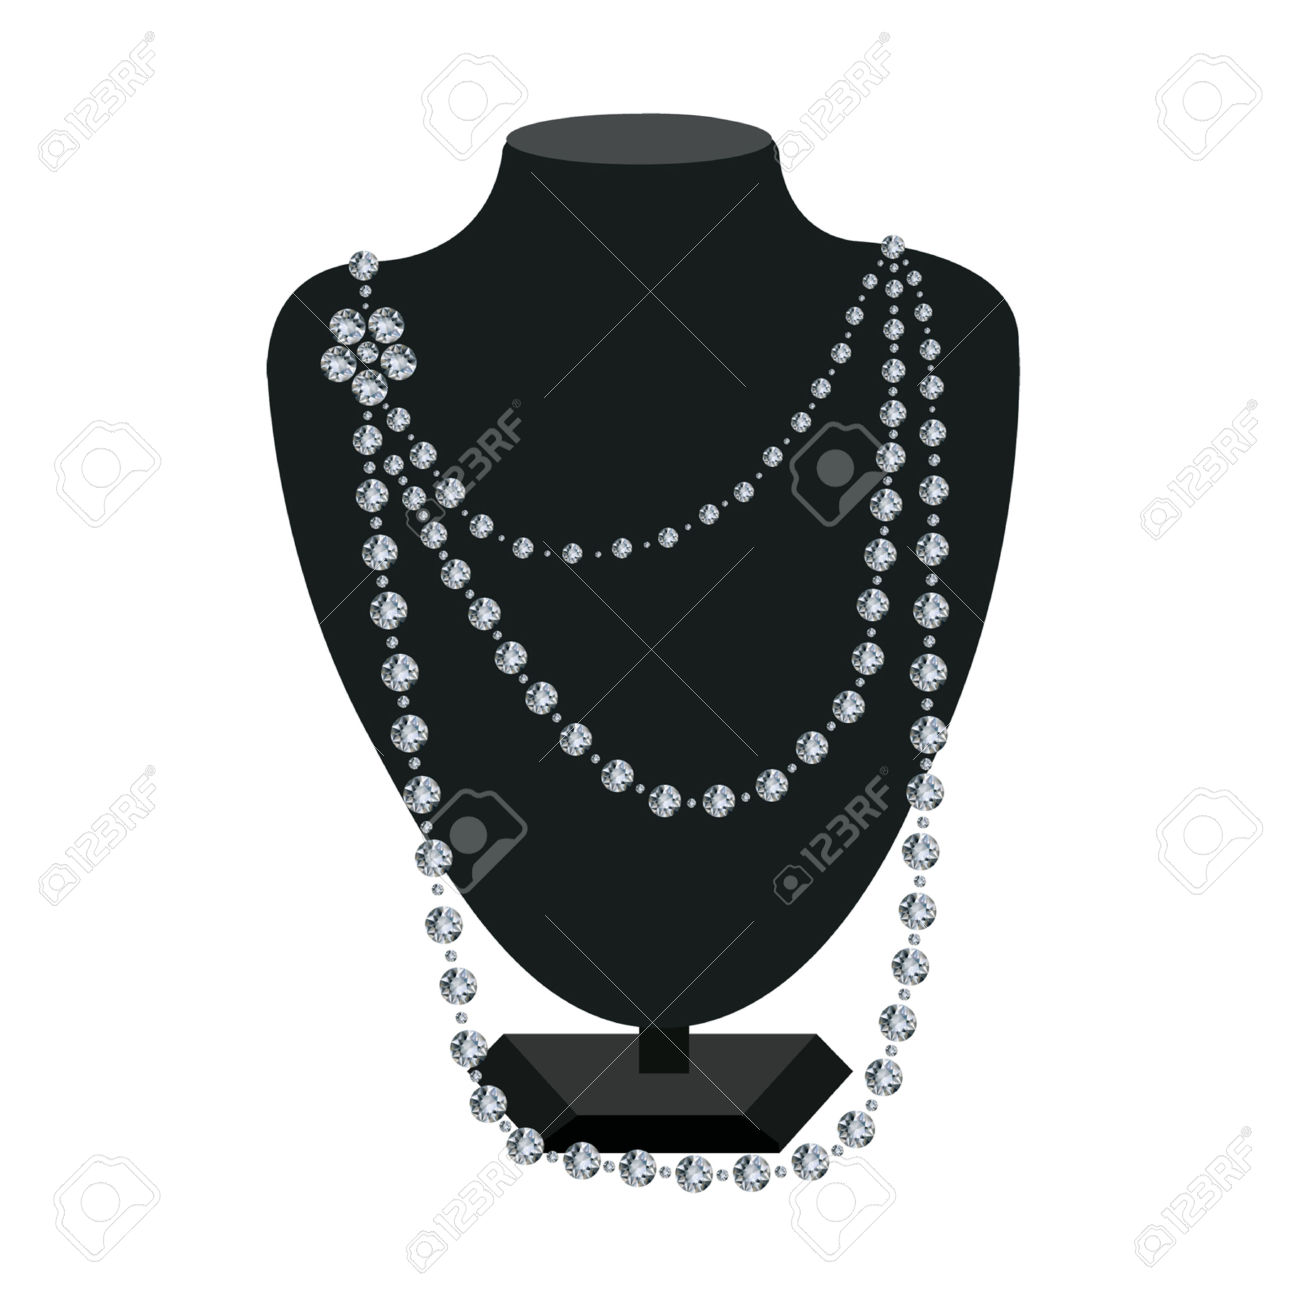 jewelry party clip art - photo #18